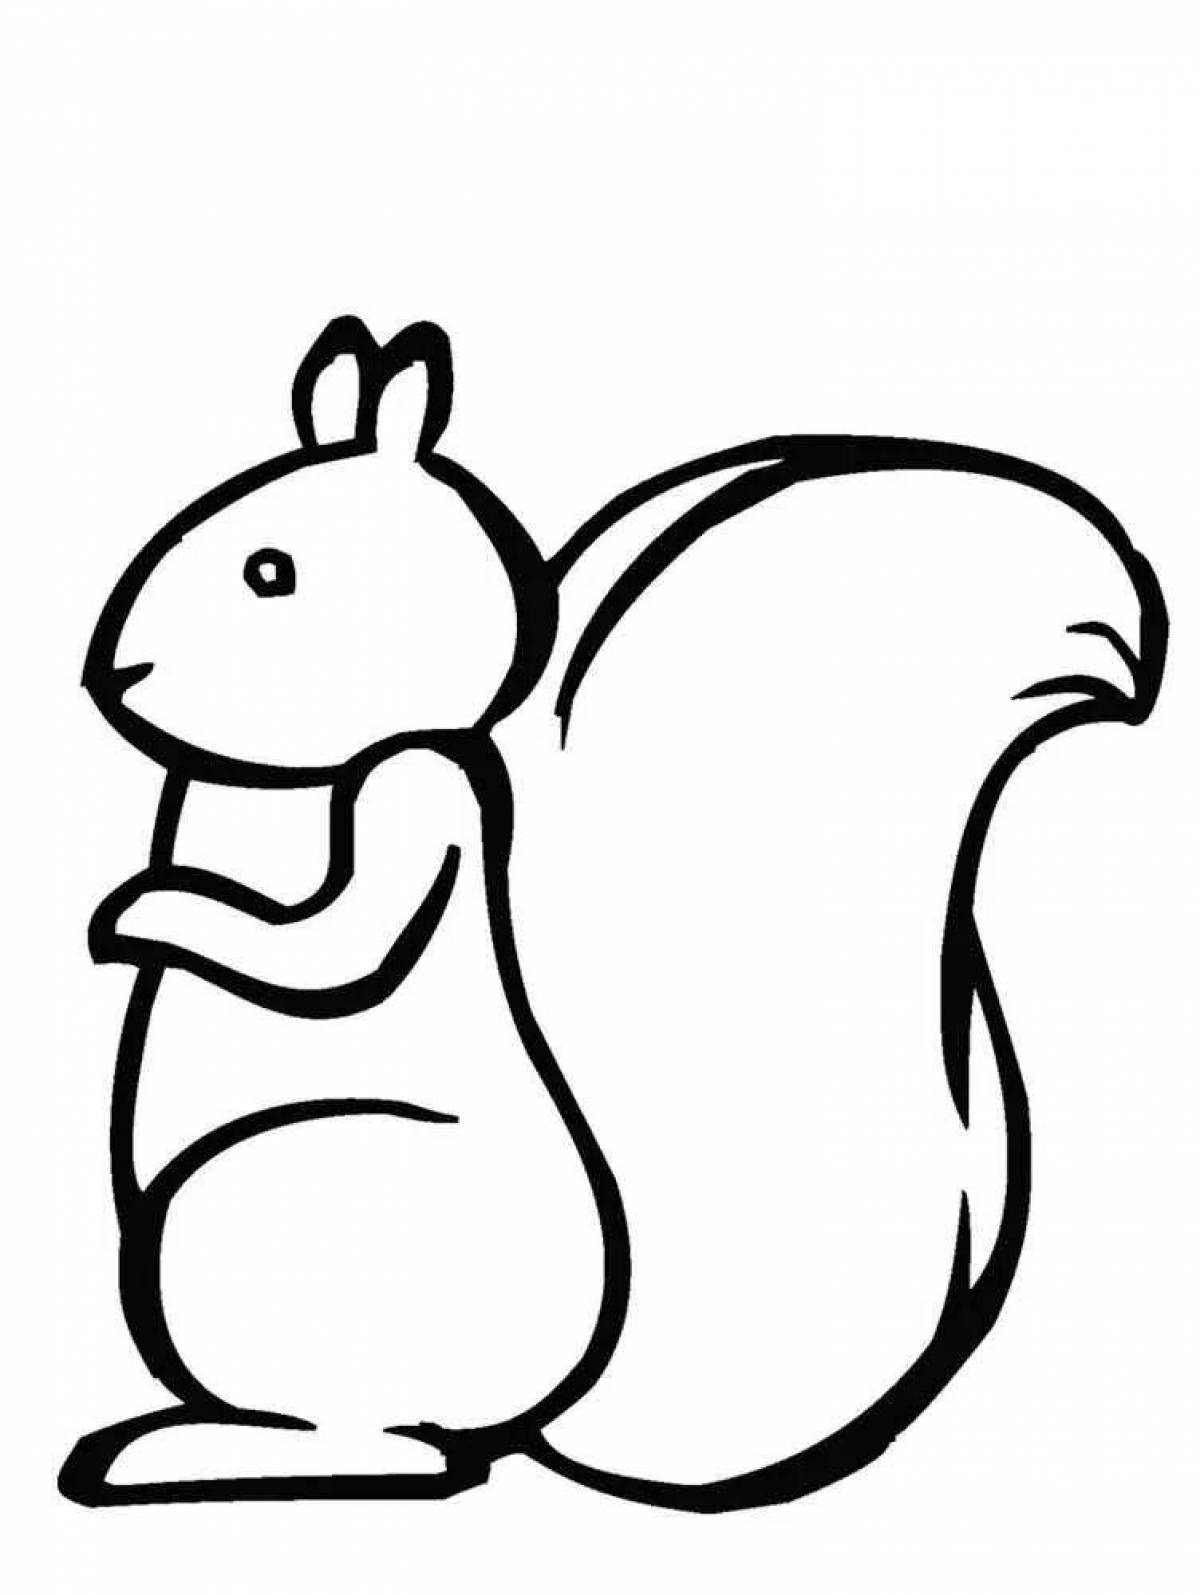 A fun squirrel coloring book for kids